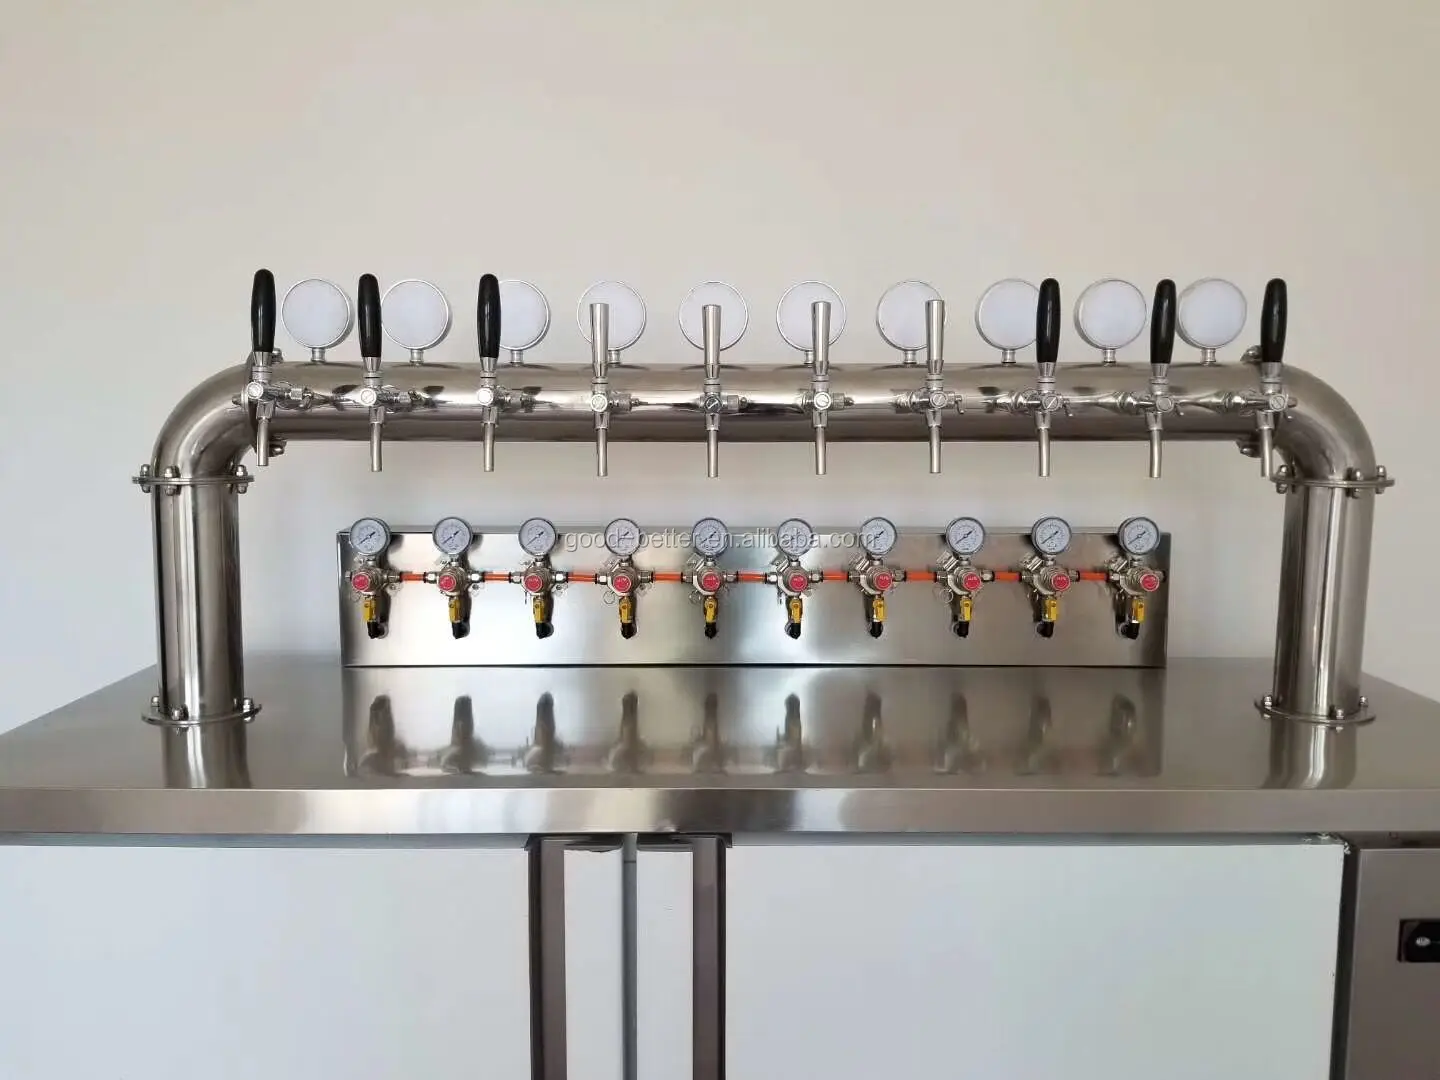 GB103067 stainless steel OEM Beer kegerator with 10 taps beer tower can hold 10pcs 20L keg